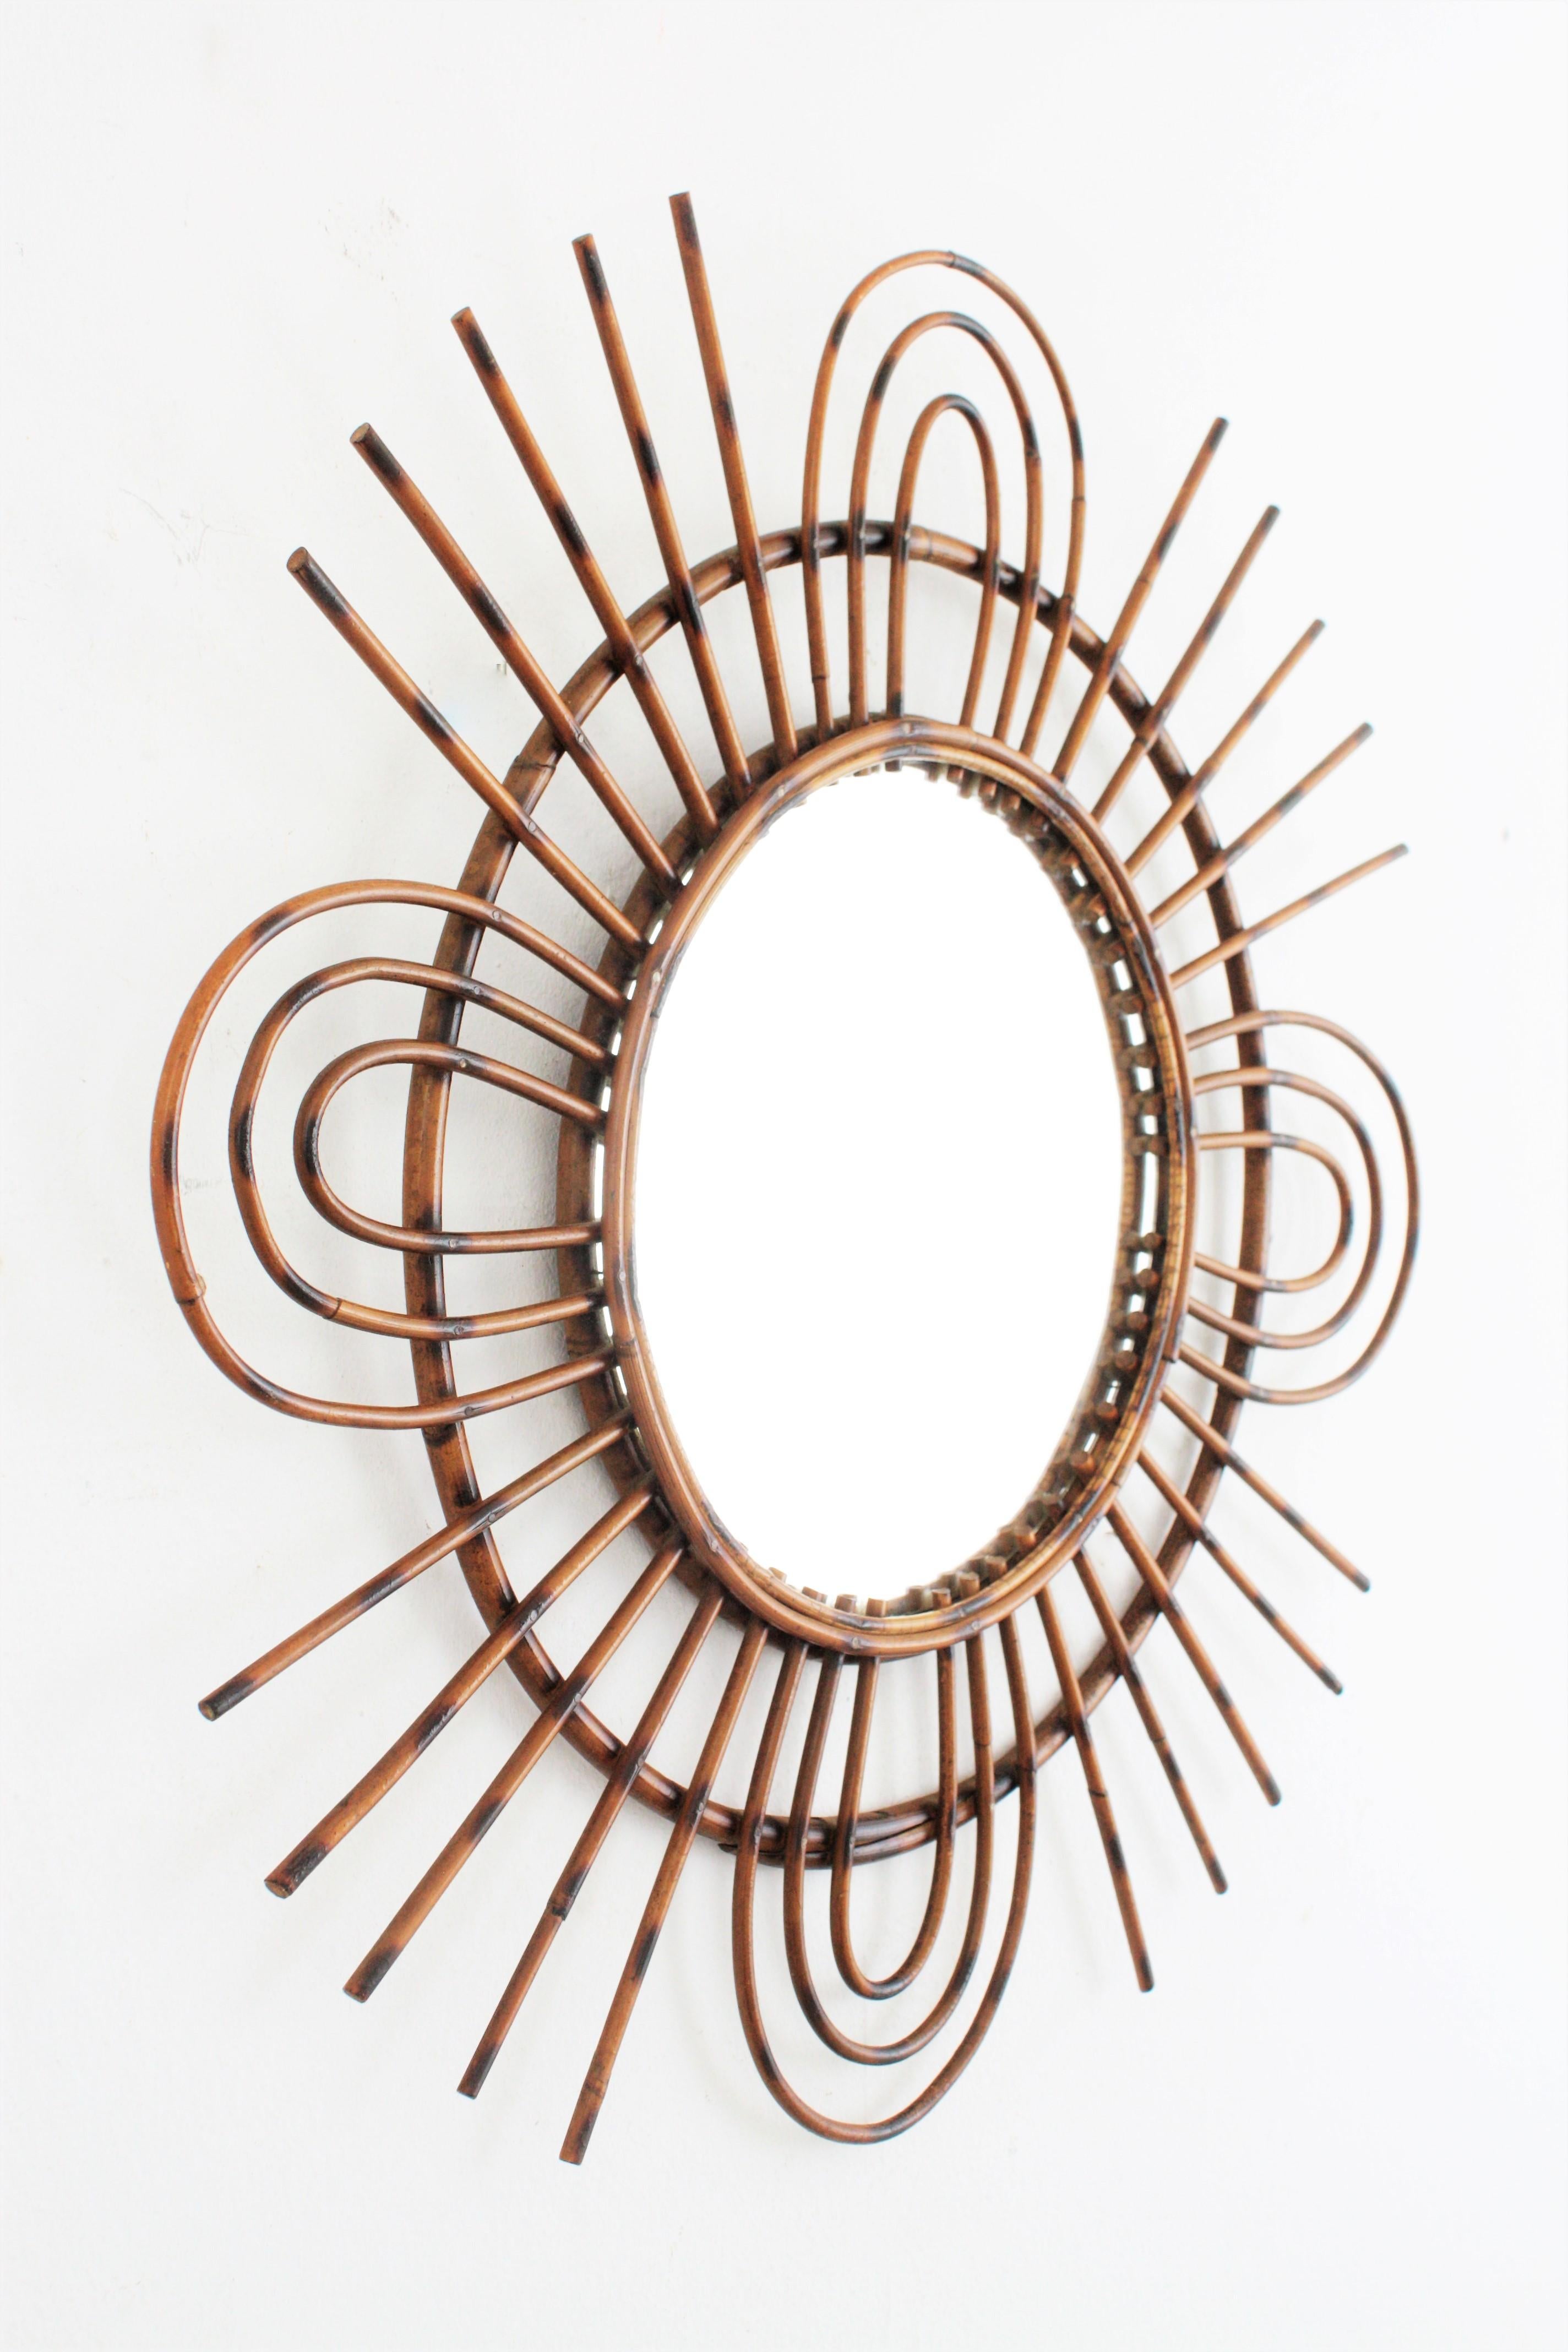 Hand-Crafted 1960s French Riviera Midcentury Rattan Sunburst Mirror with Triple Petals